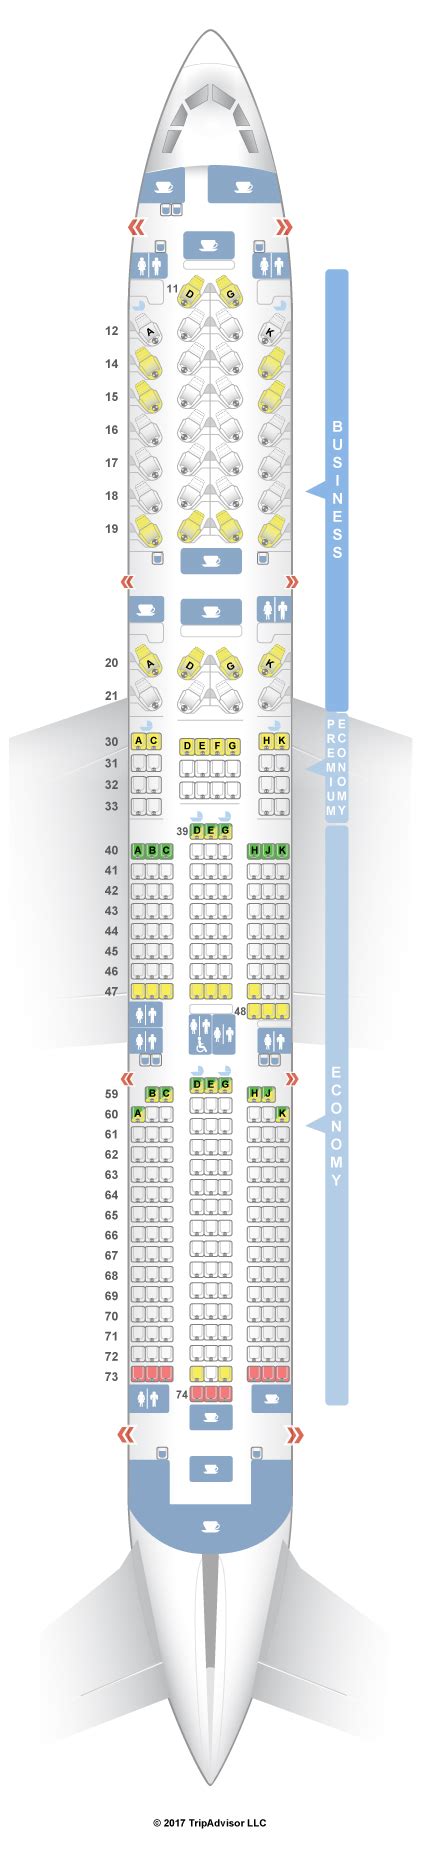 A350 900 Singapore Airlines Seat Map